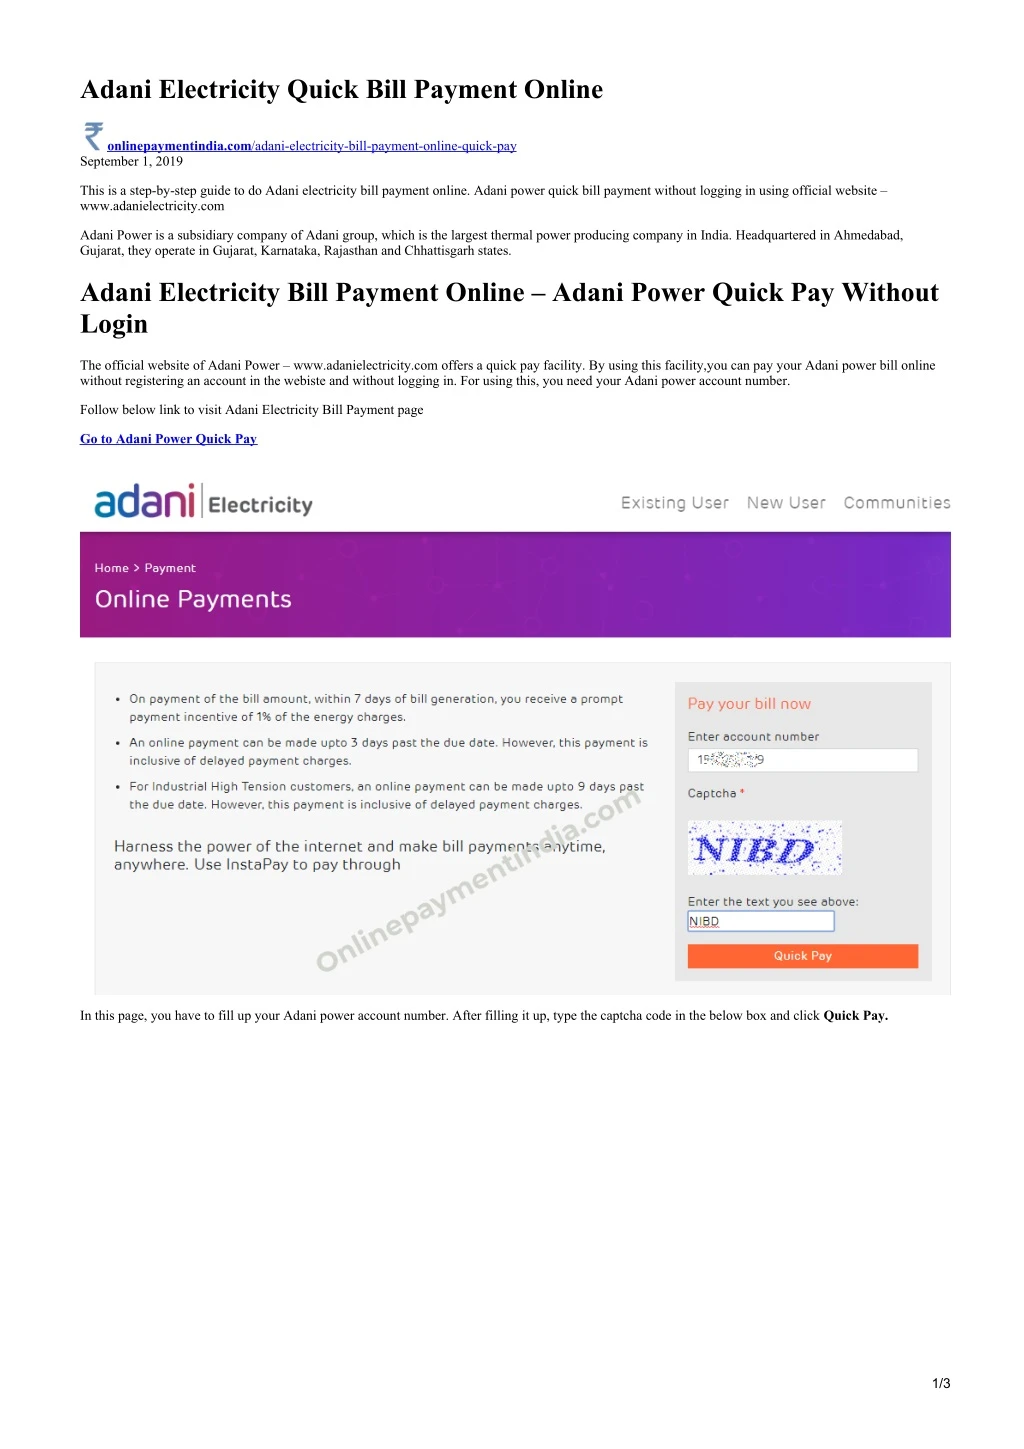 adani electricity quick bill payment online